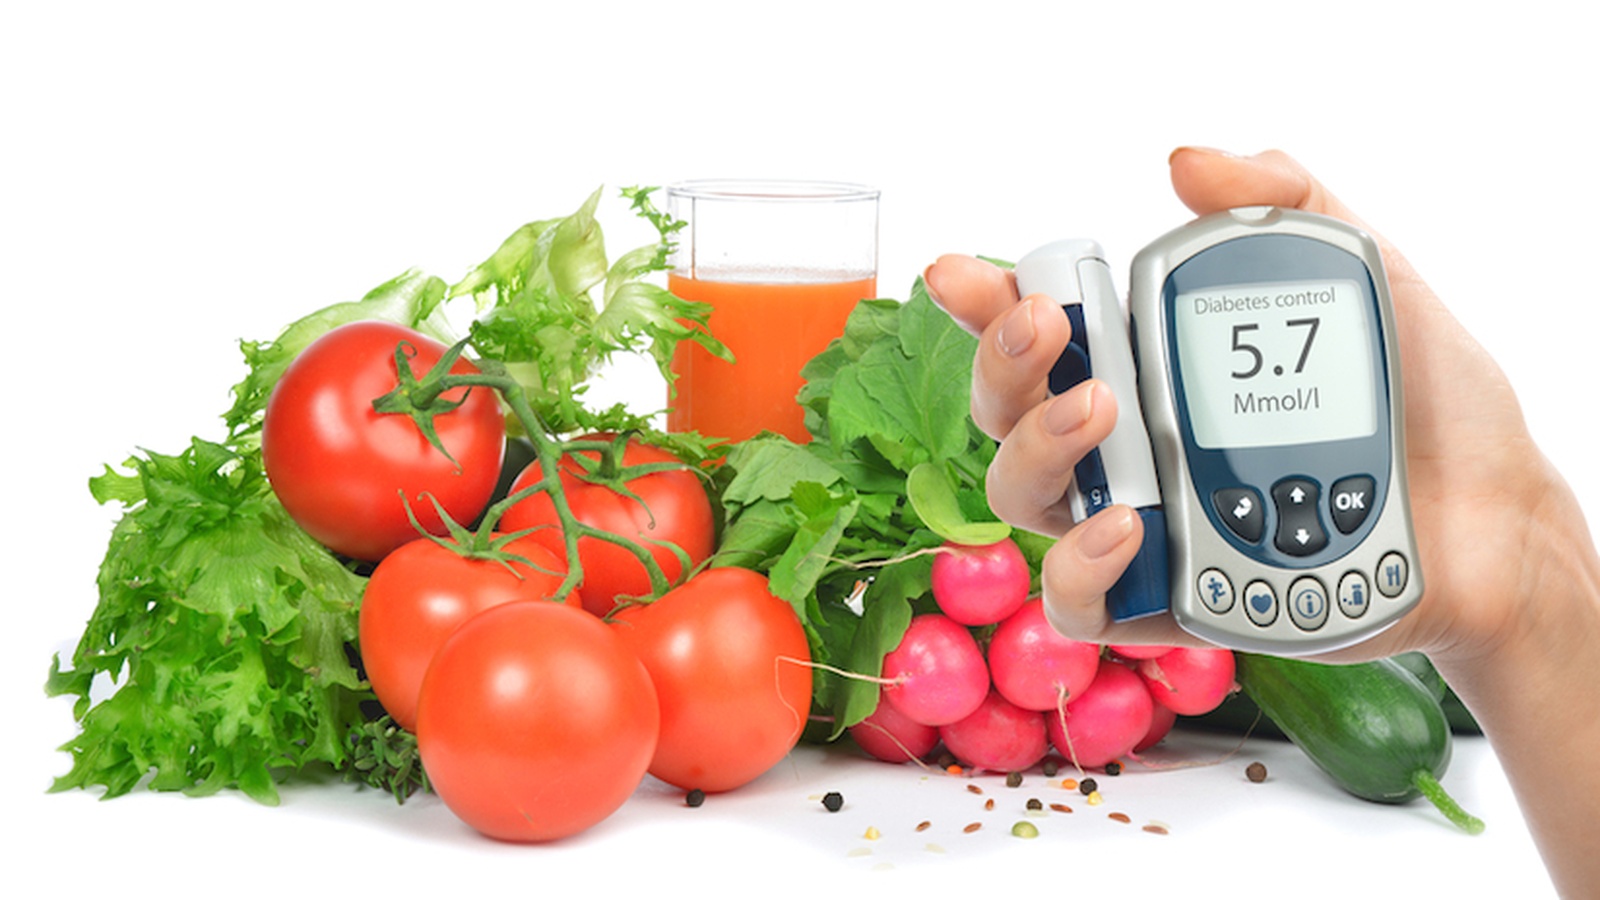 Diabetes Can Be Reversed Through Major Diet & Lifestyle Changes